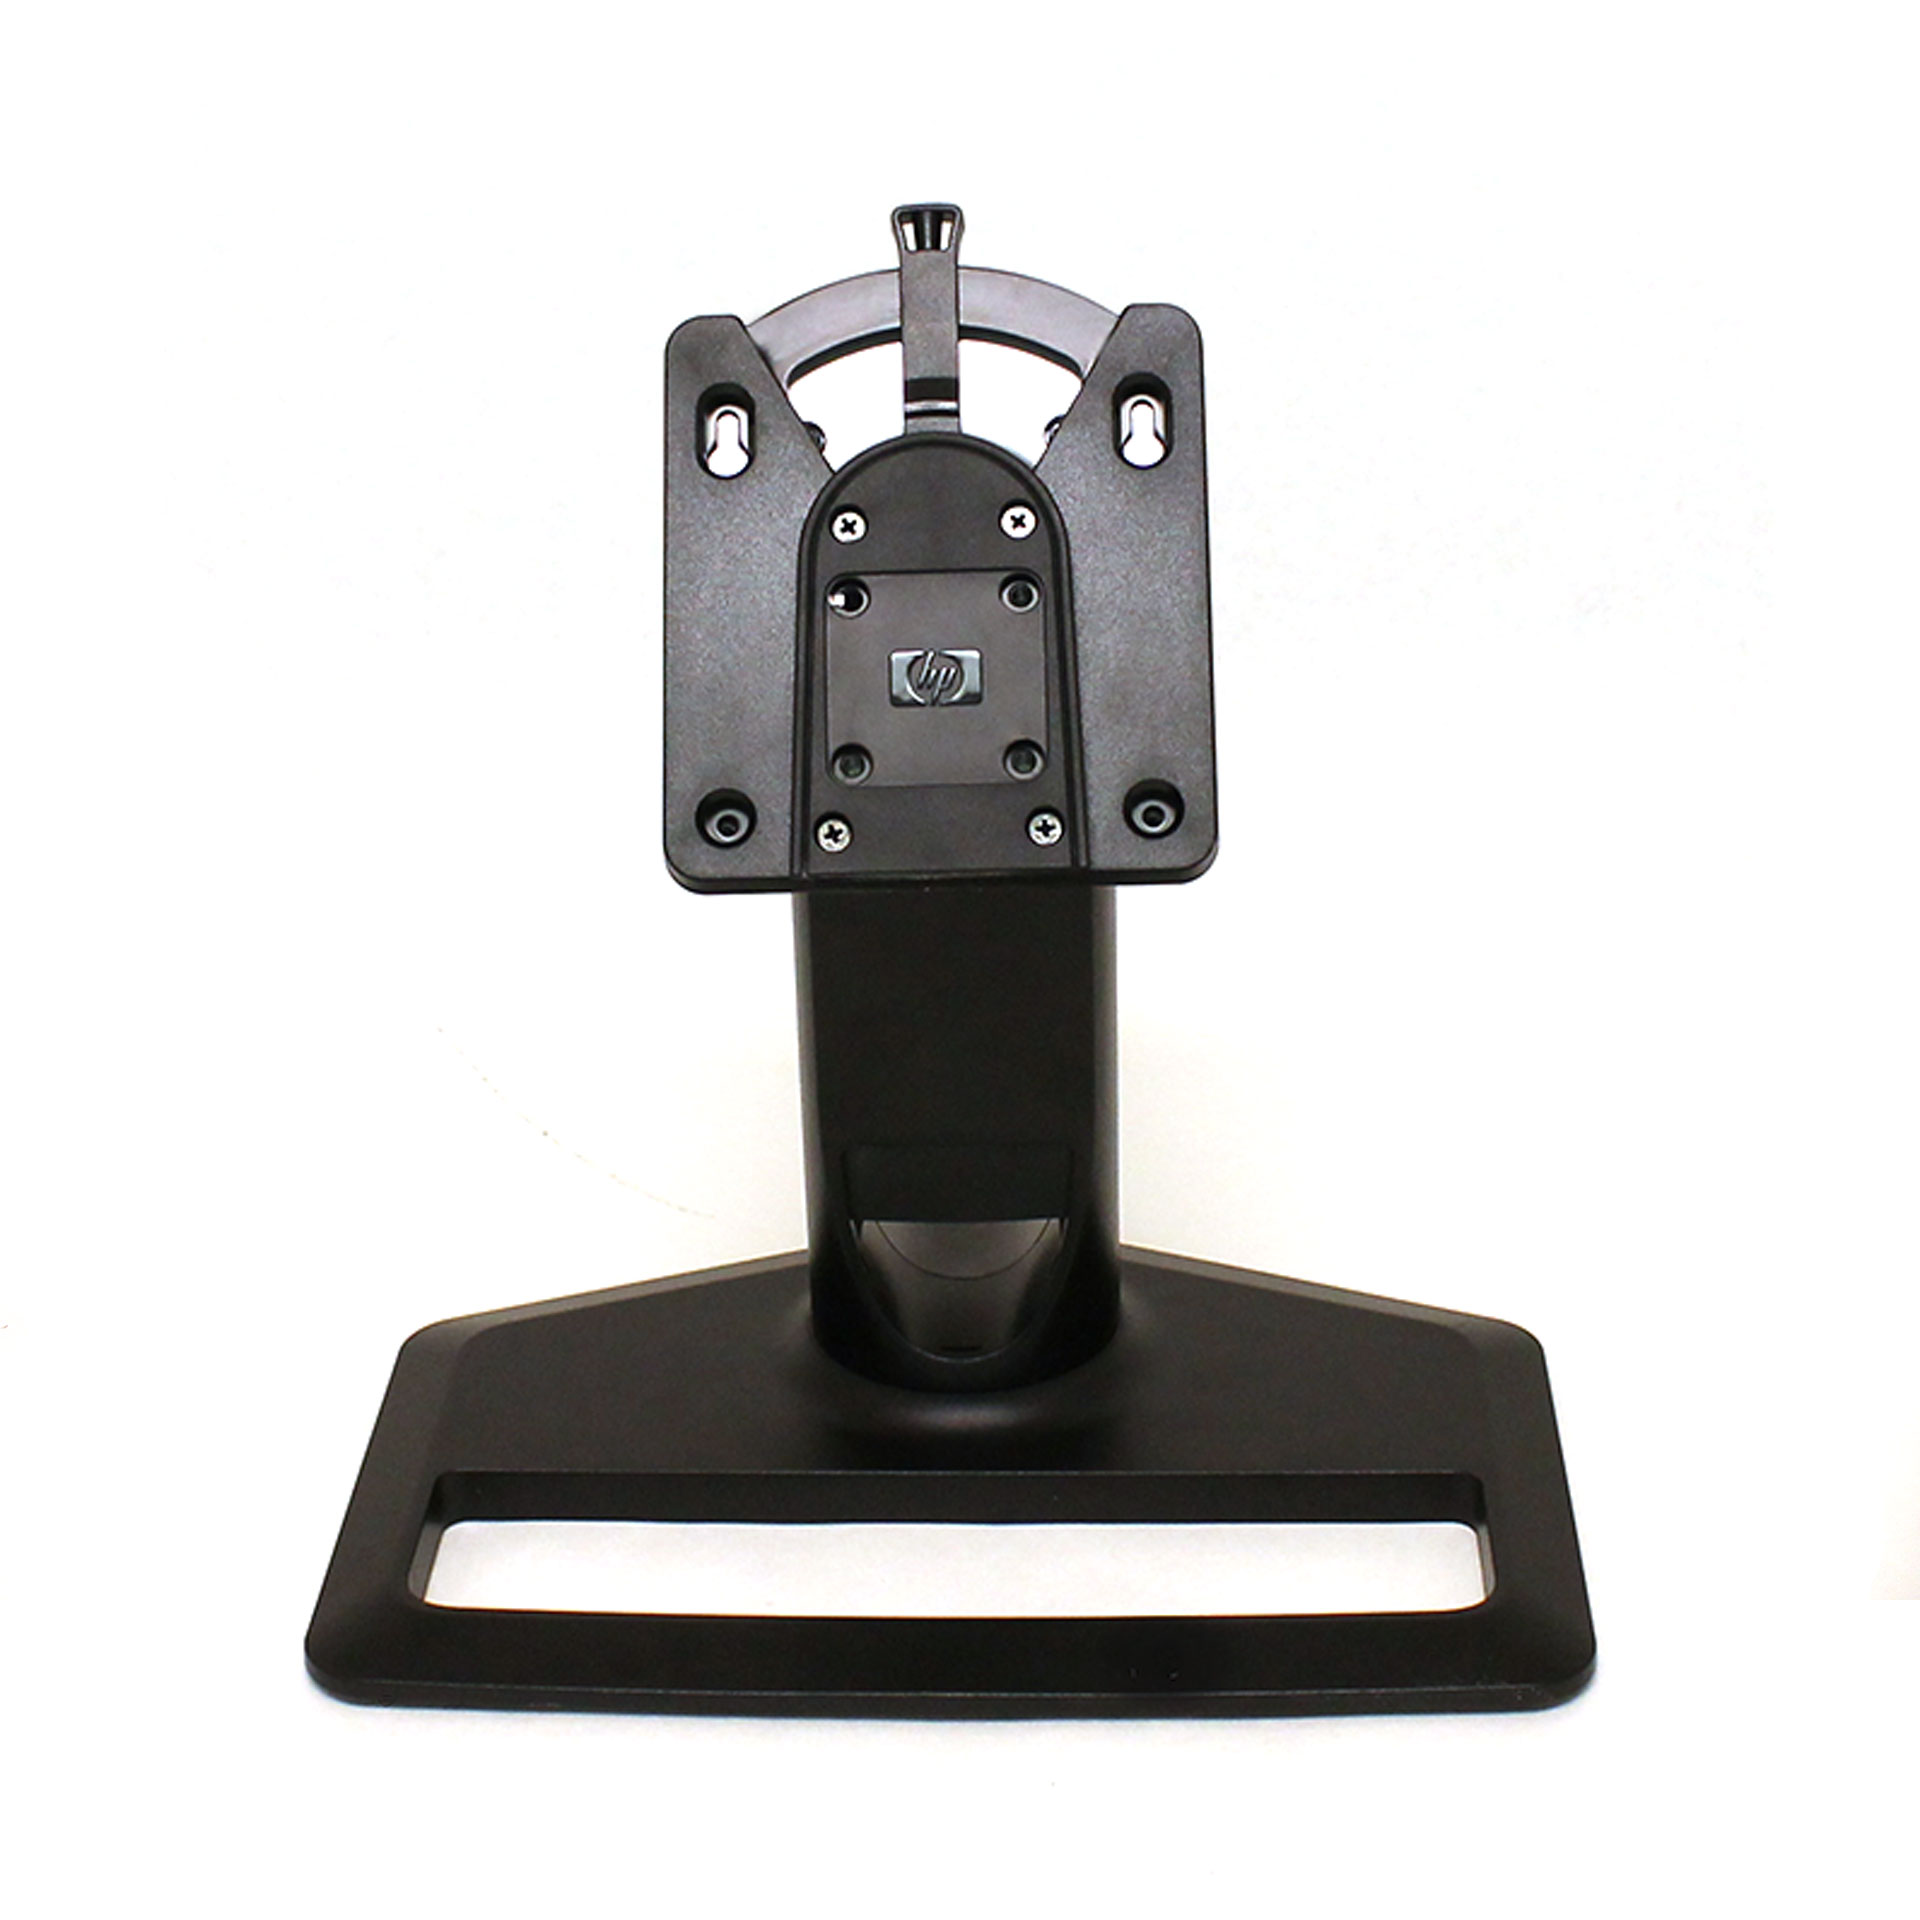 Stand (spare part) for HP ZR22w 21.5-inch Widescreen LCD Monitor - Click Image to Close